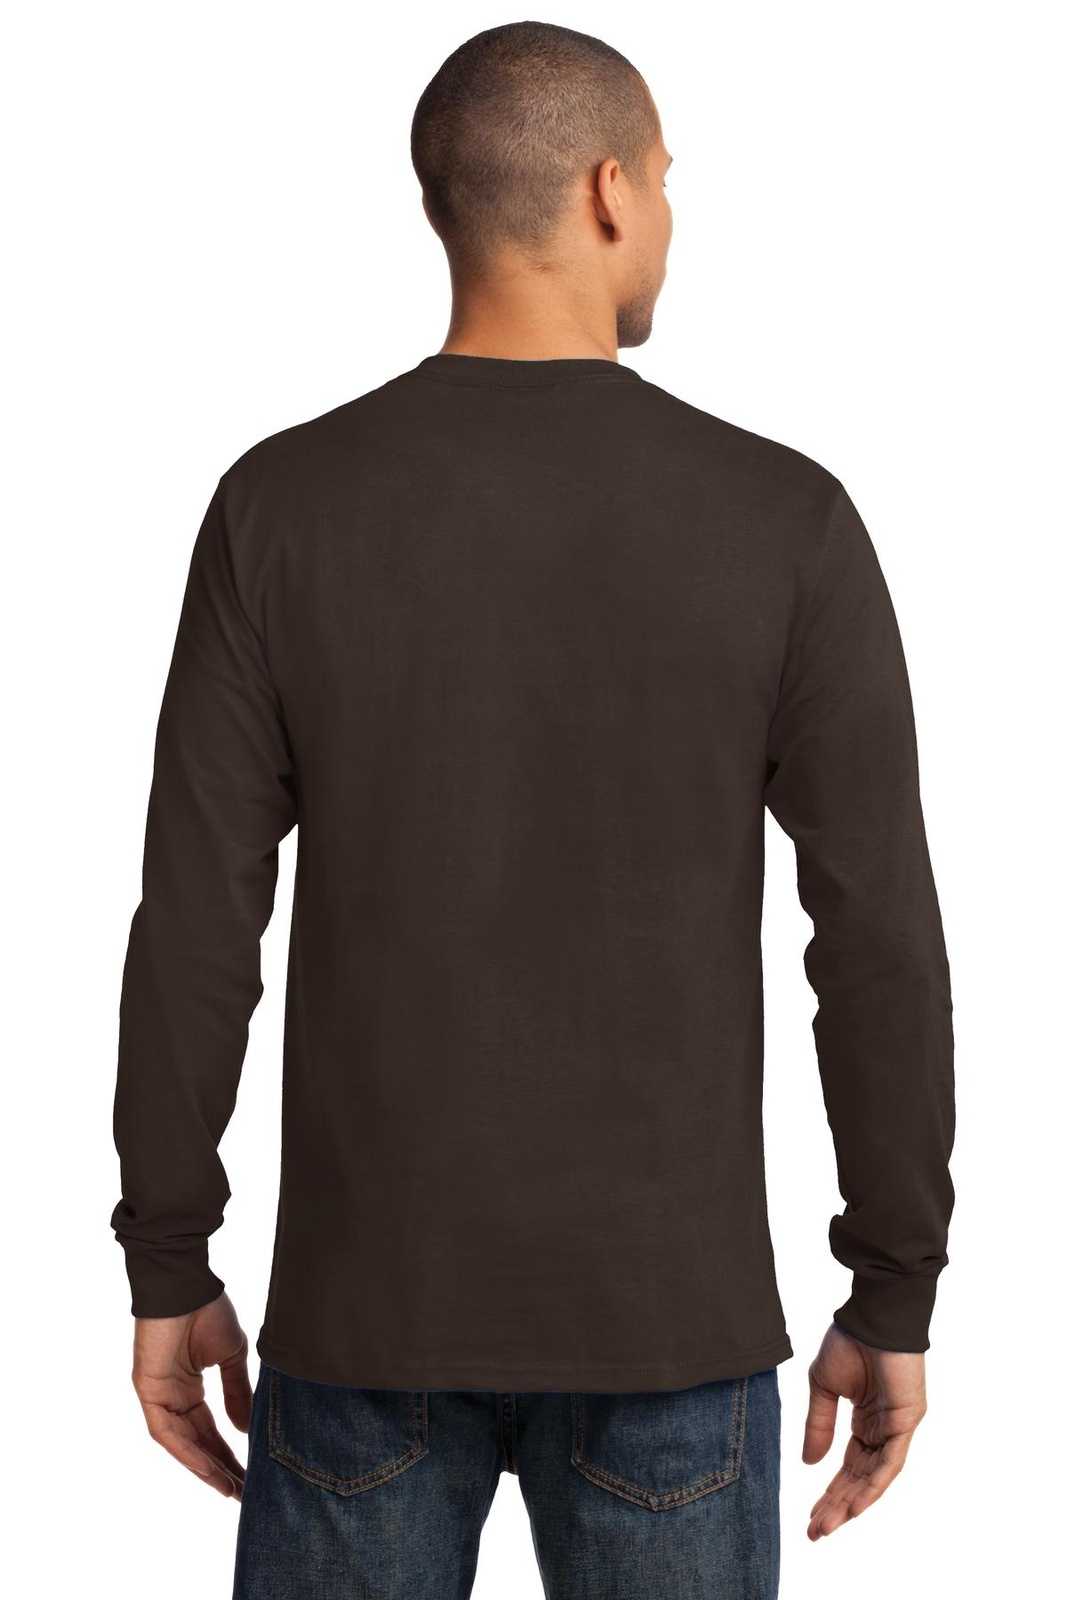 Port & Company PC61LS Long Sleeve Essential Tee - Dark Chocolate Brown - HIT a Double - 1